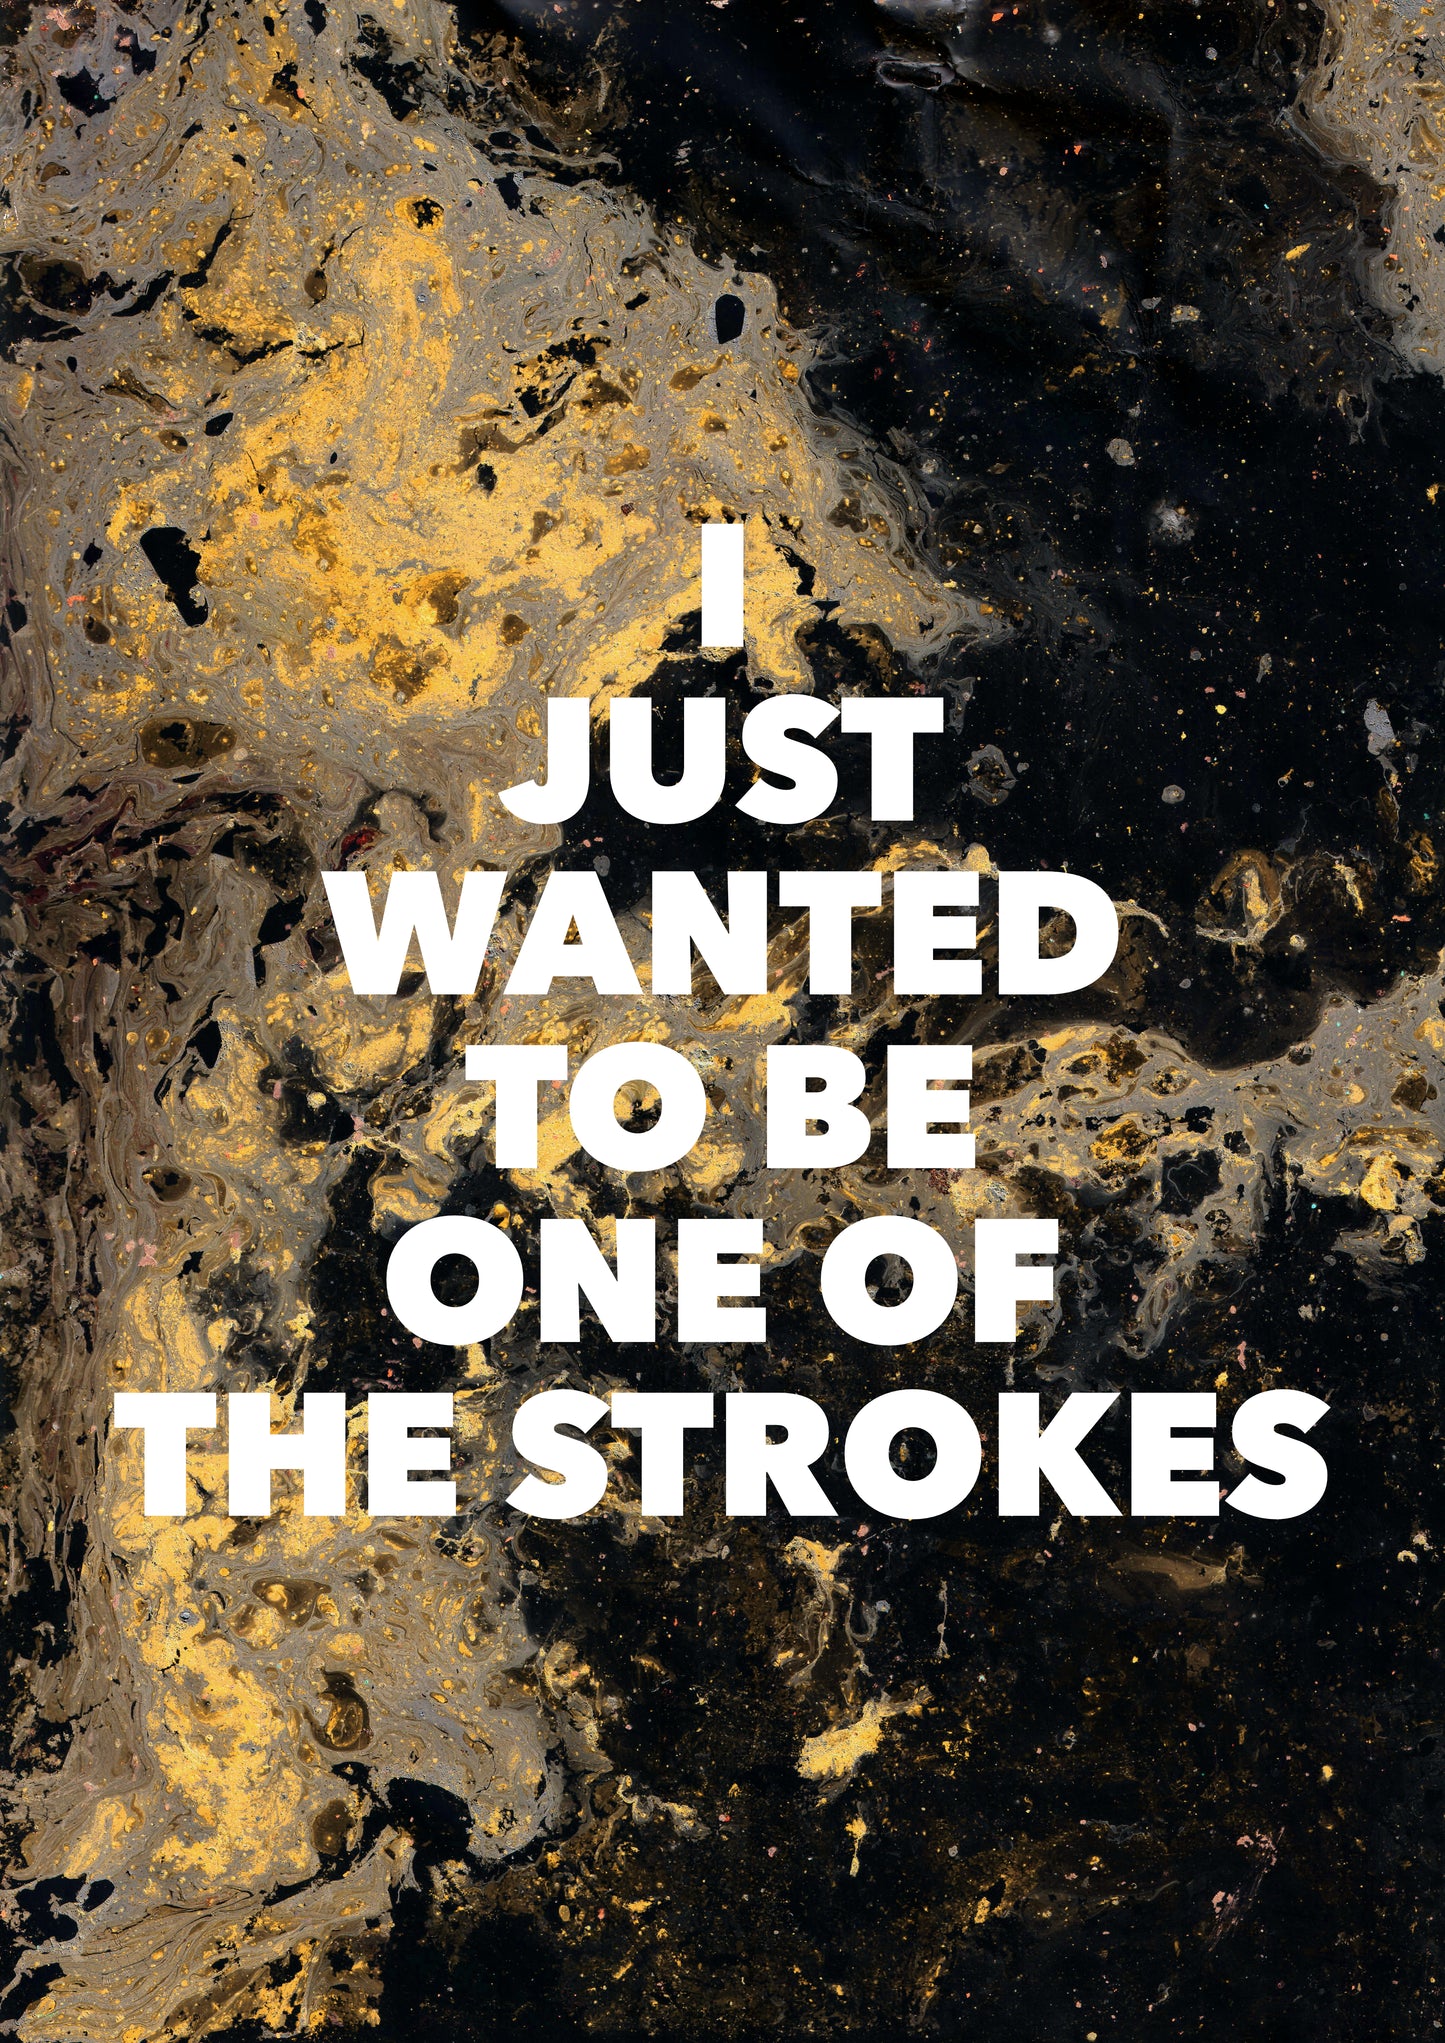 I JUST WANTED TO BE ONE OF THE STROKES